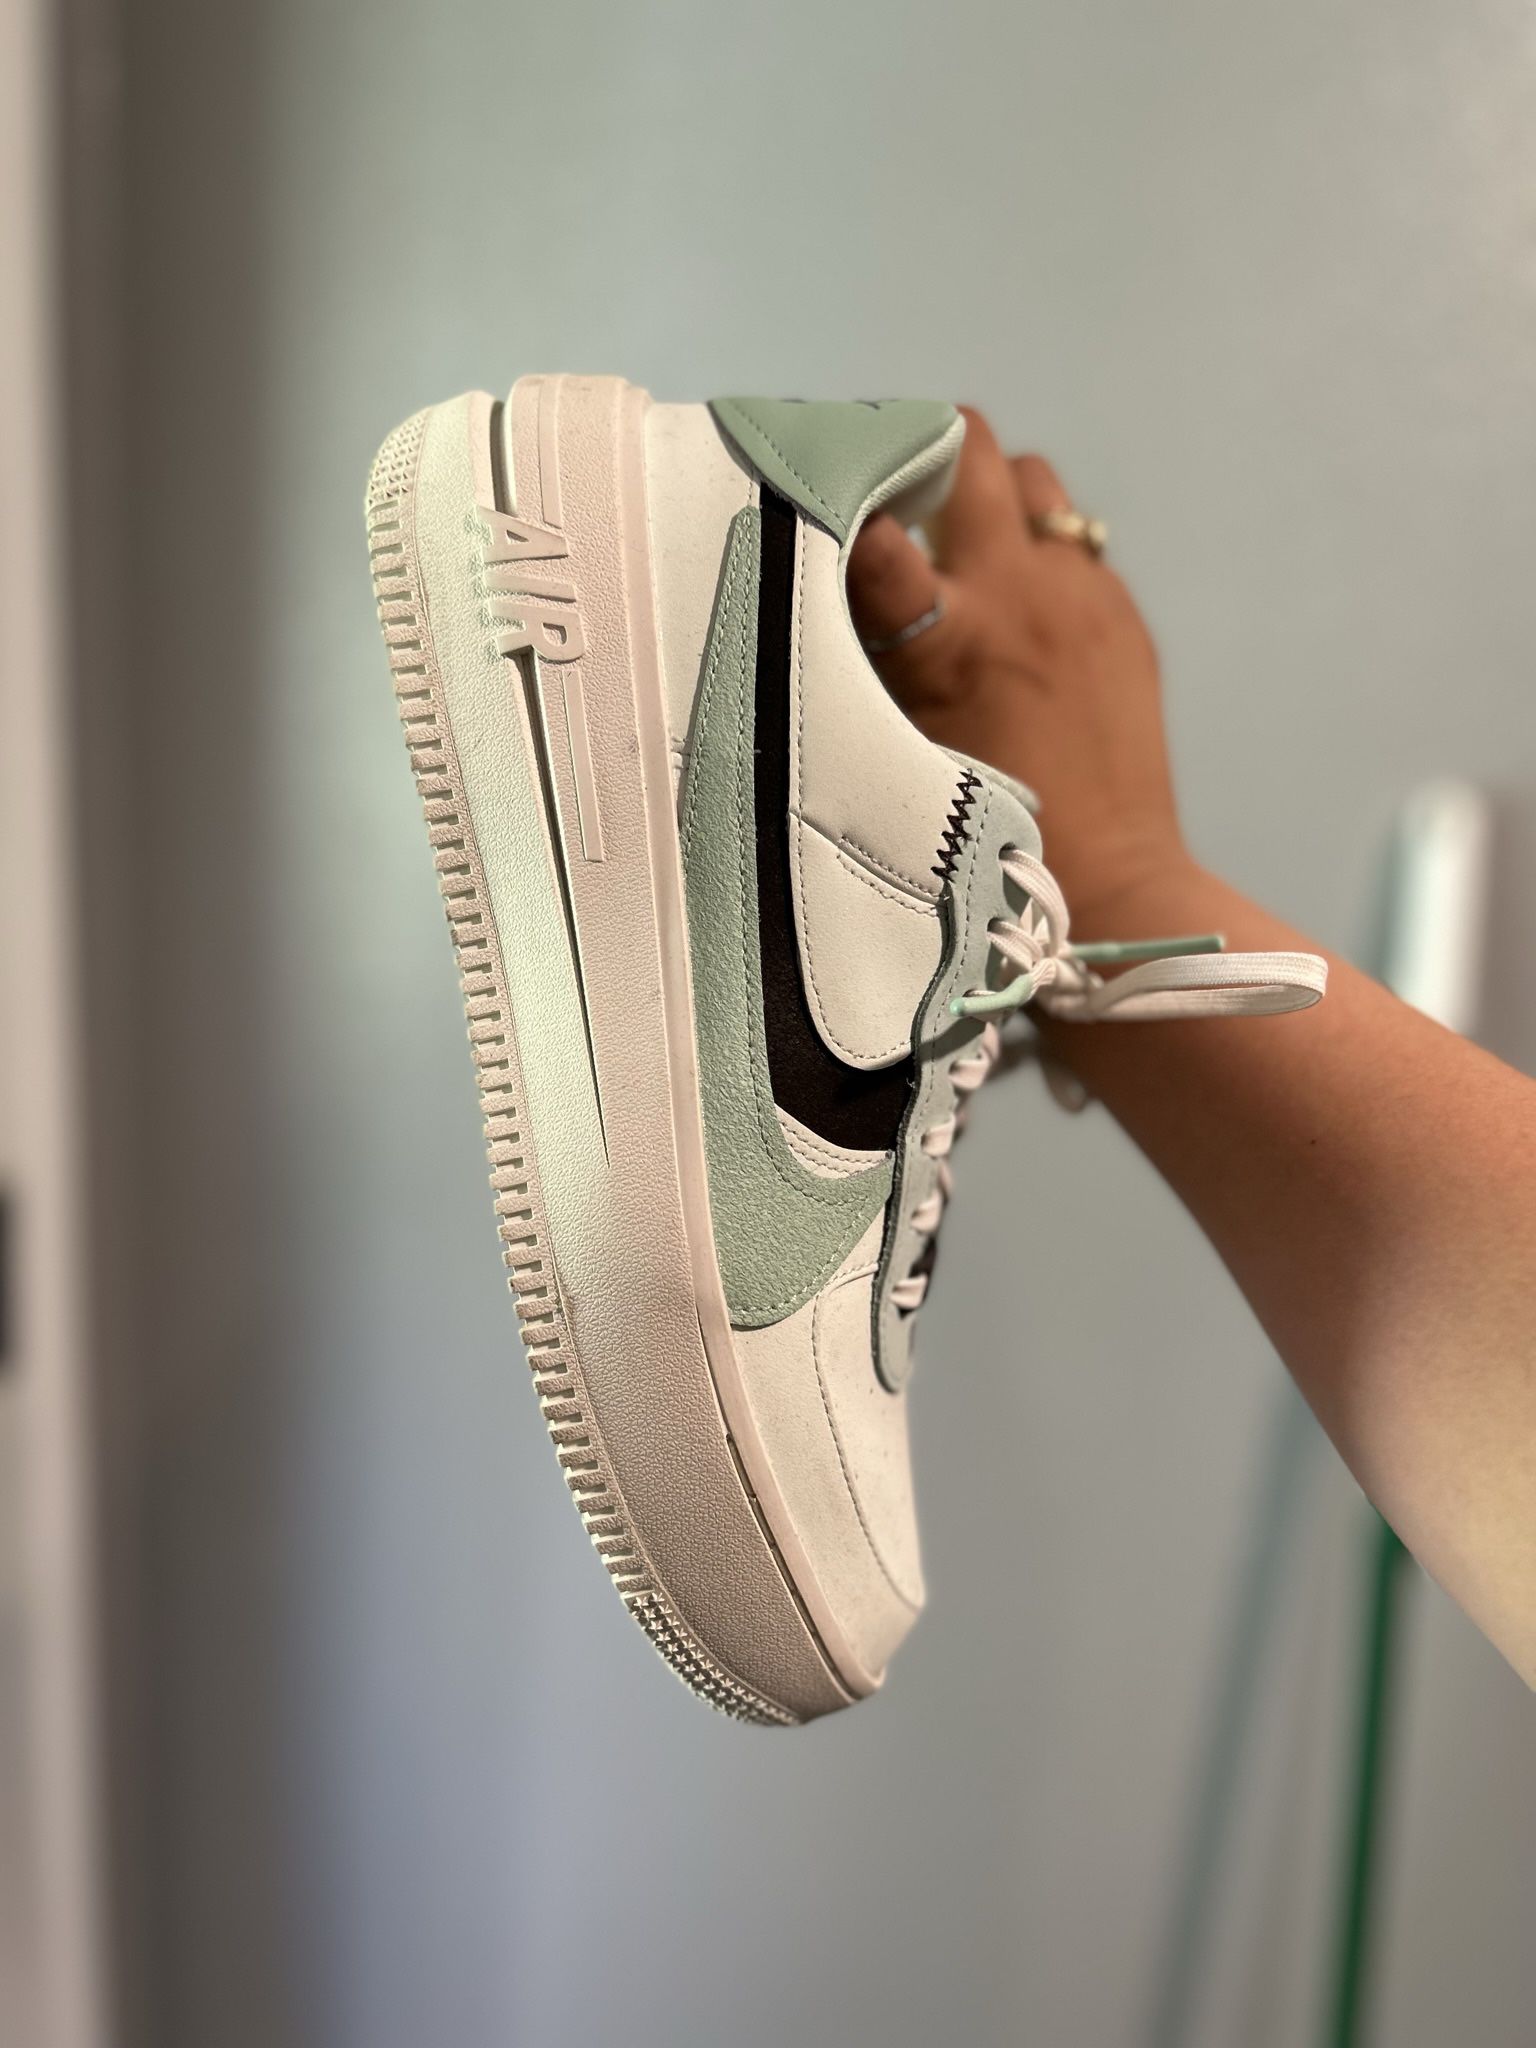 Nike Air Force https://offerup.com/redirect/?o=cGx0LmFm.orm  Barely Green Women’s Shoe